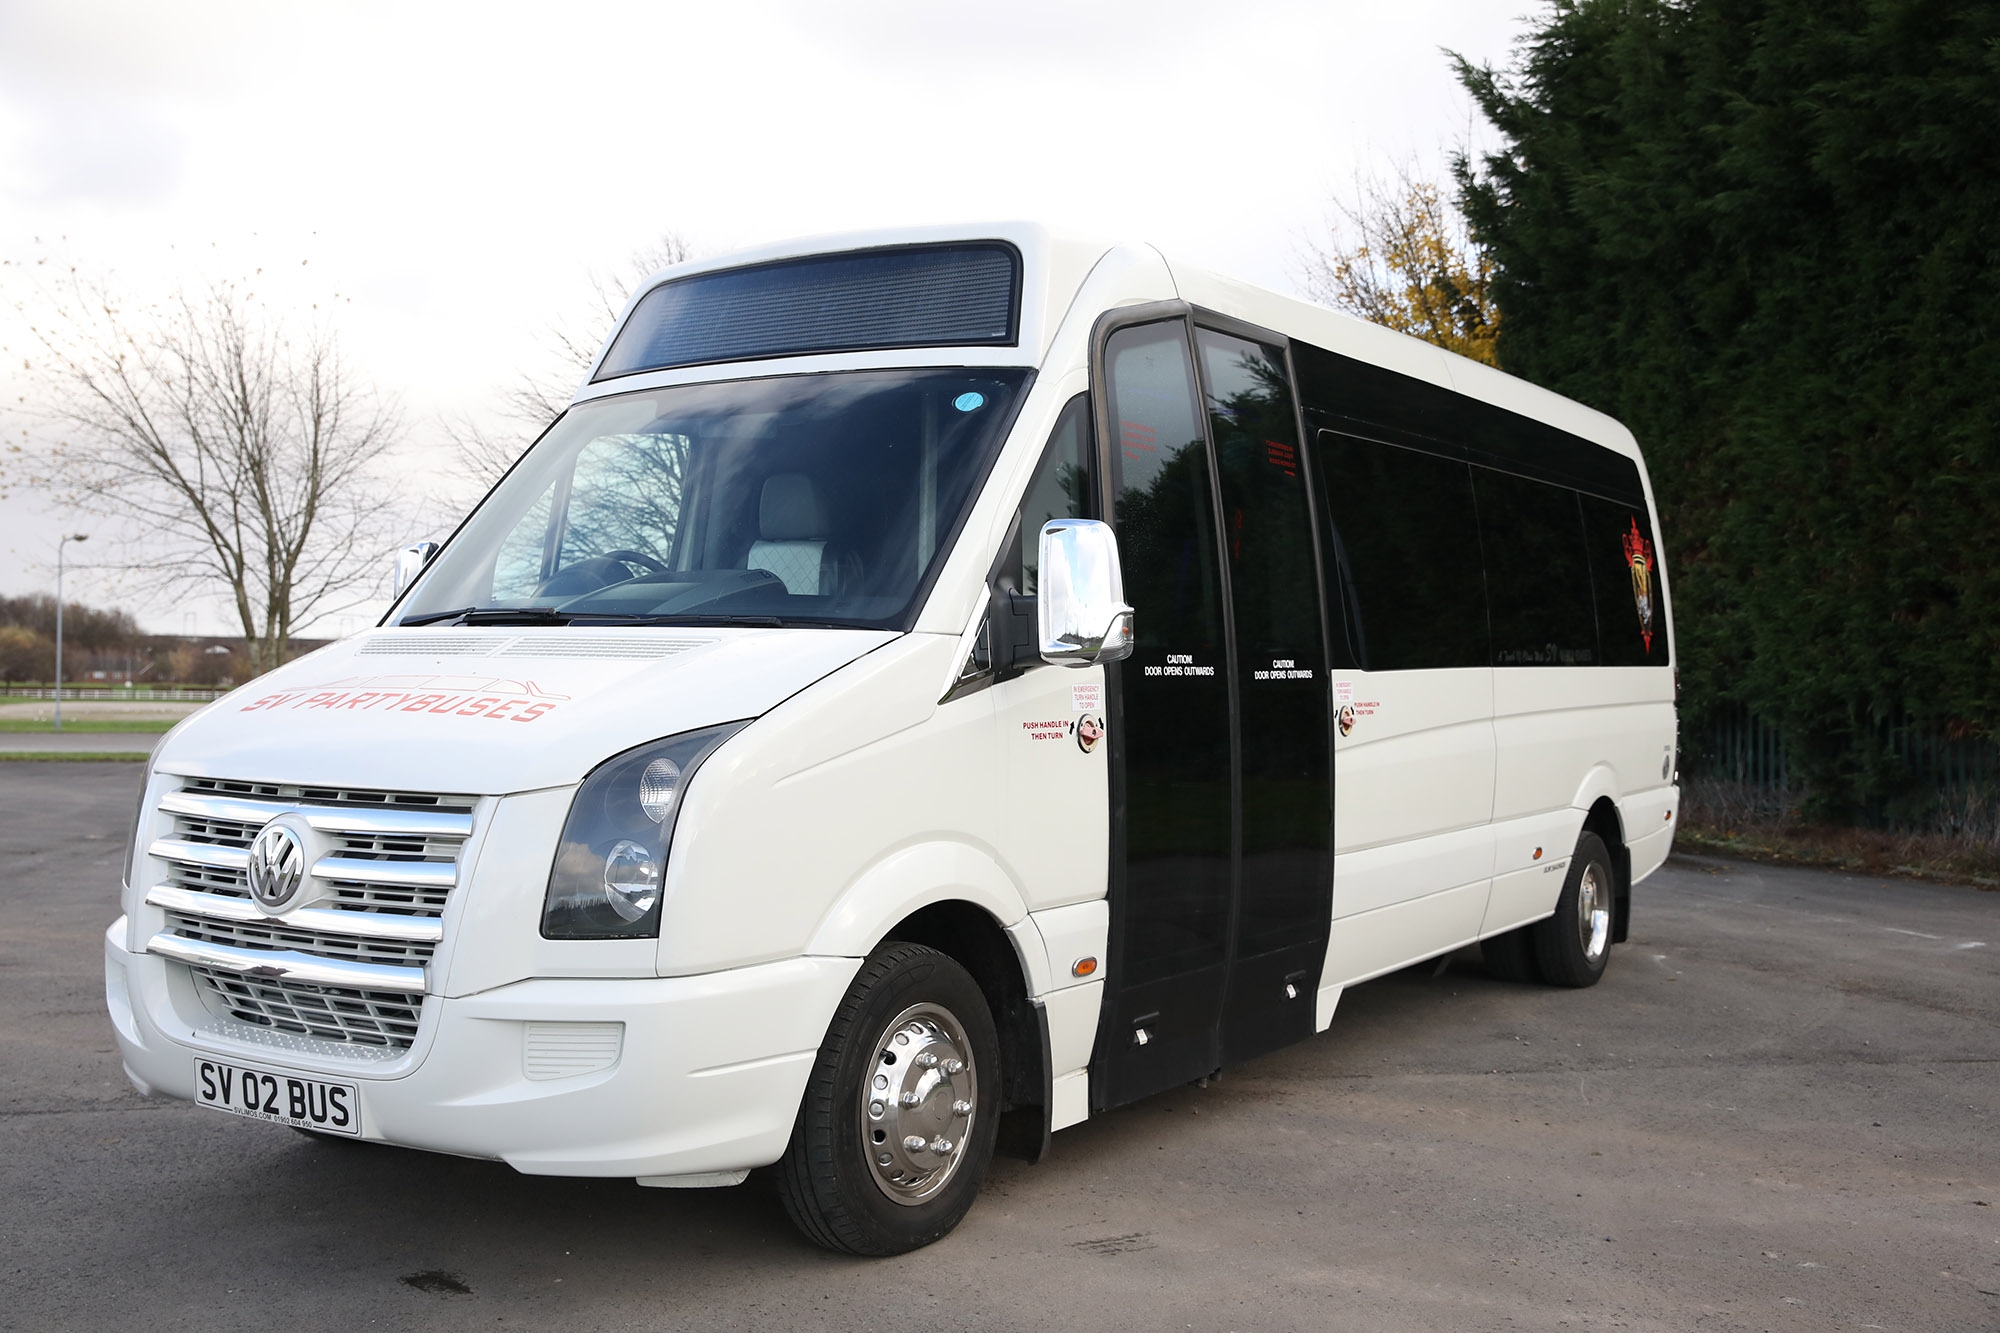 Party Bus Experience from Merthyr Tydfil to Swansea